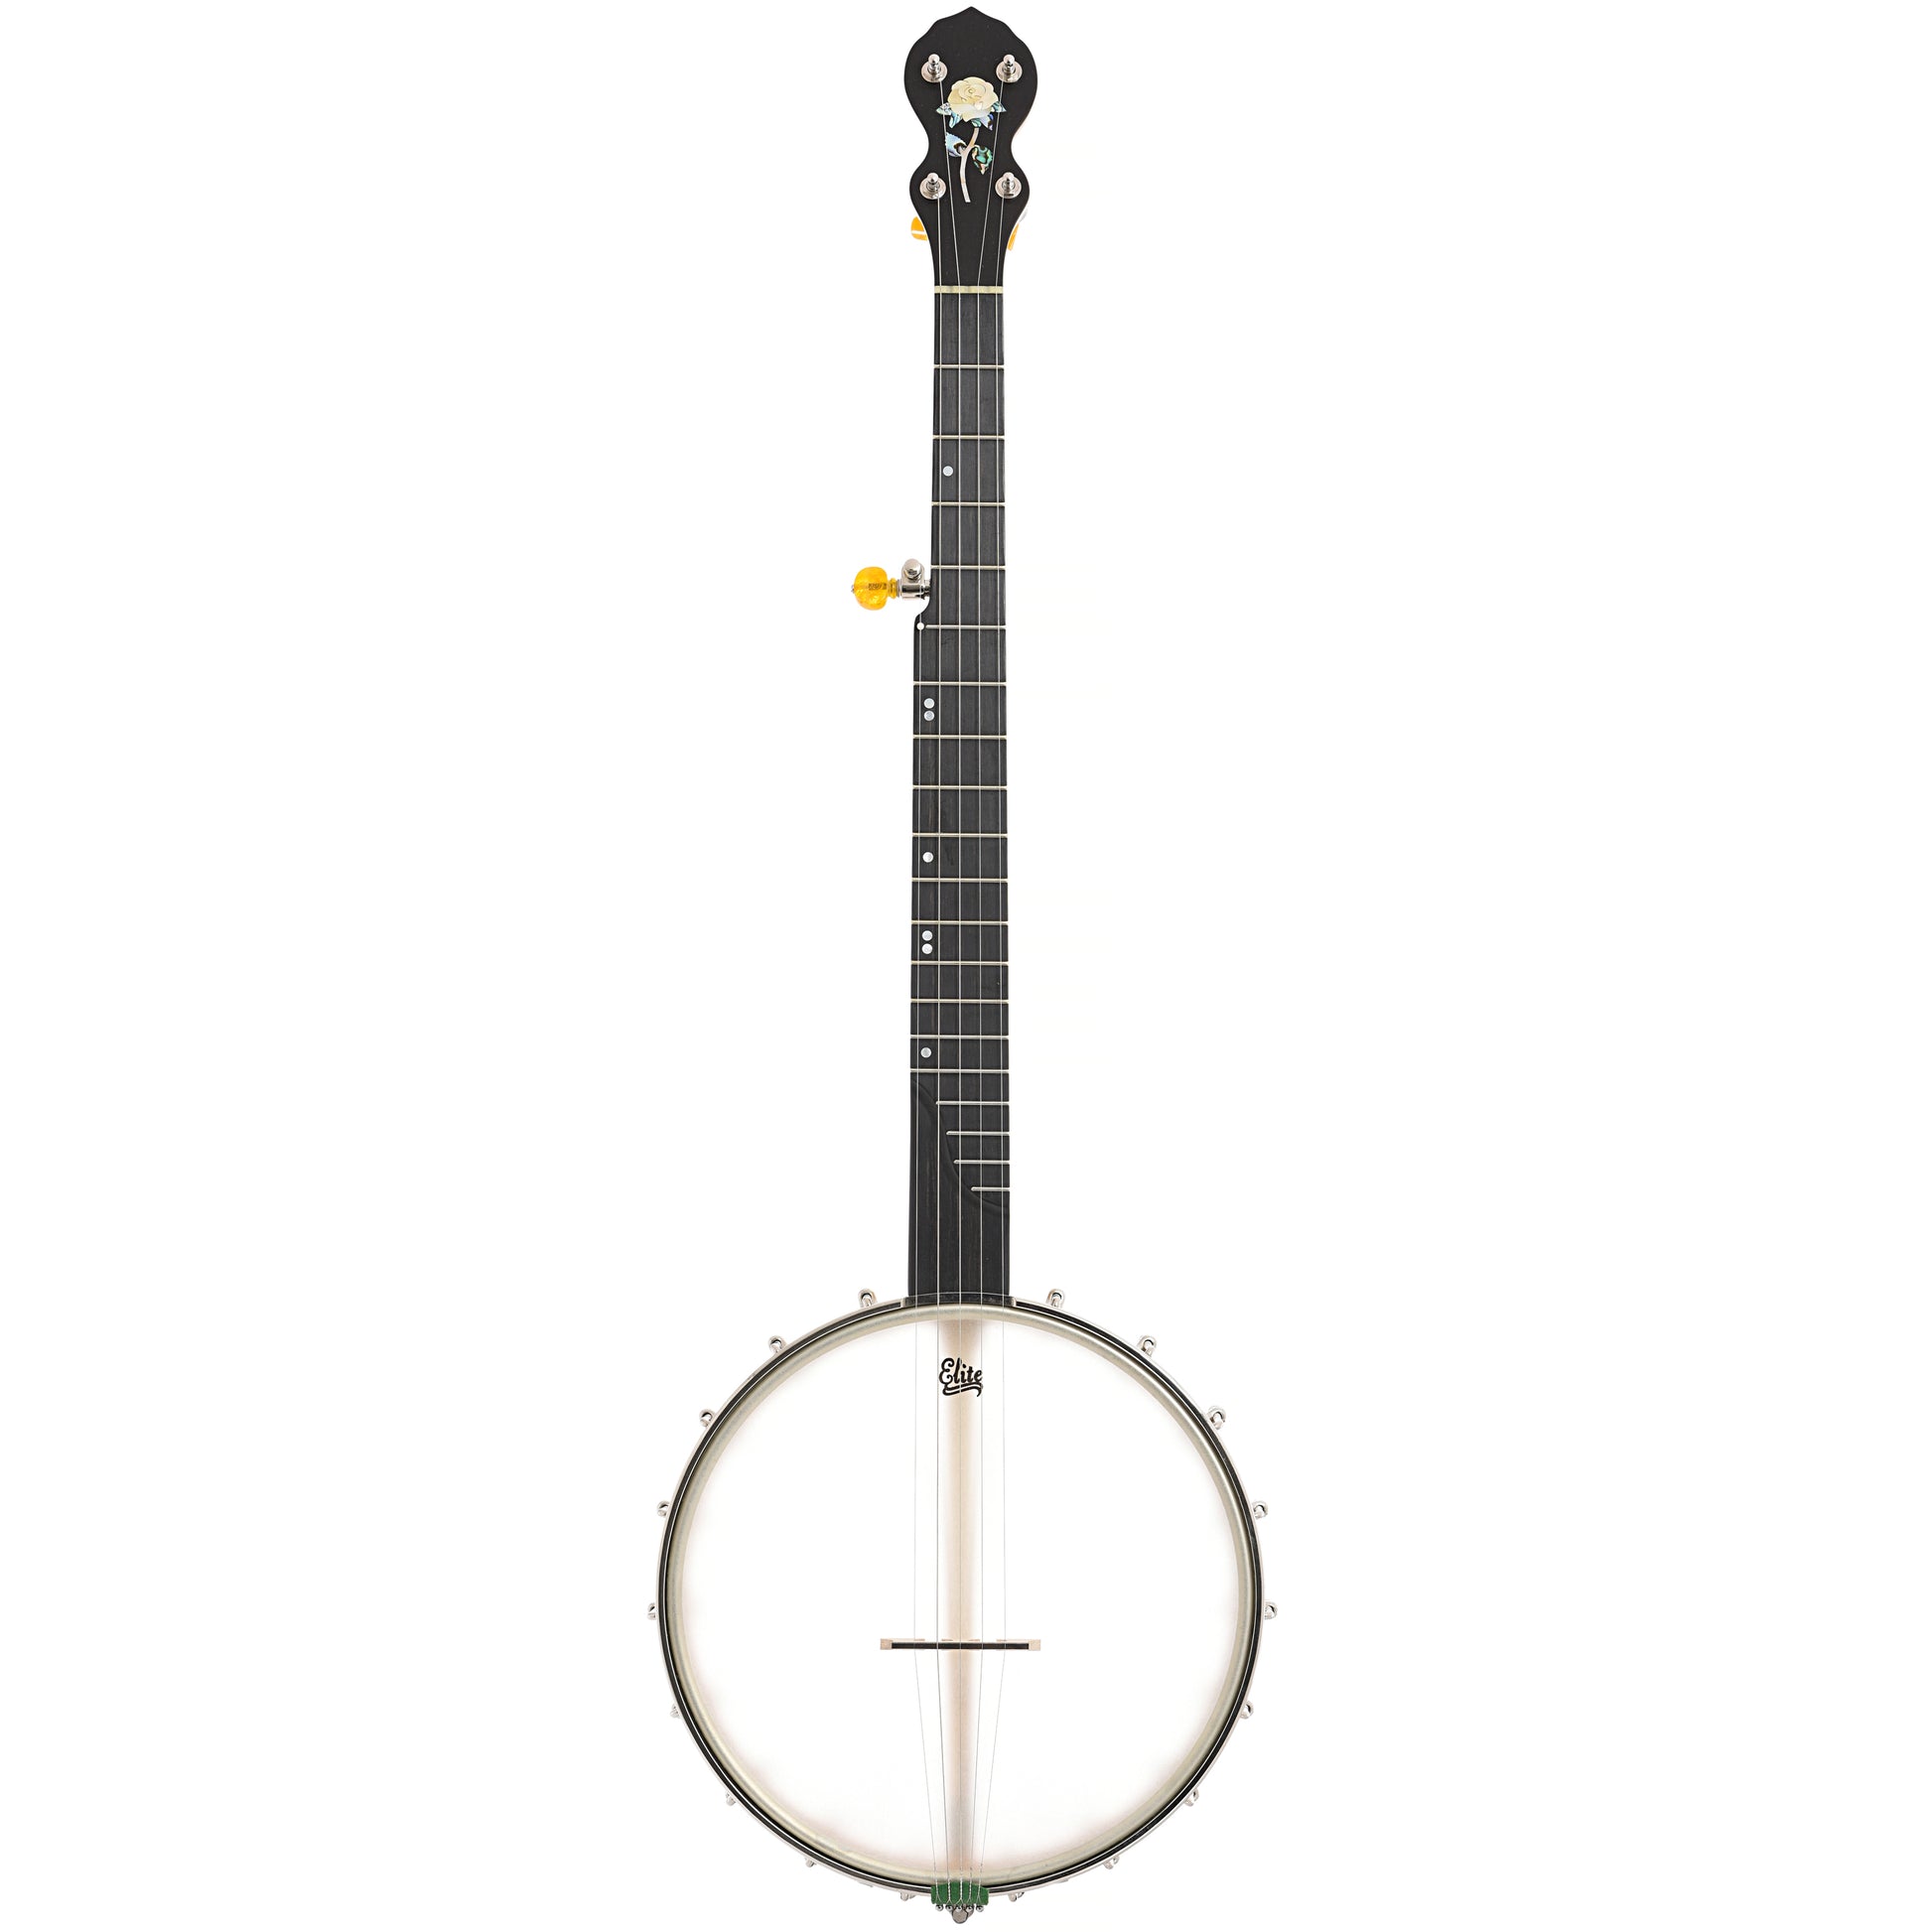 Full front of Chuck Lee Glen Rose #858 Openback Banjo, Electric (Whyte Laydie) Tone Ring, 11" Rim